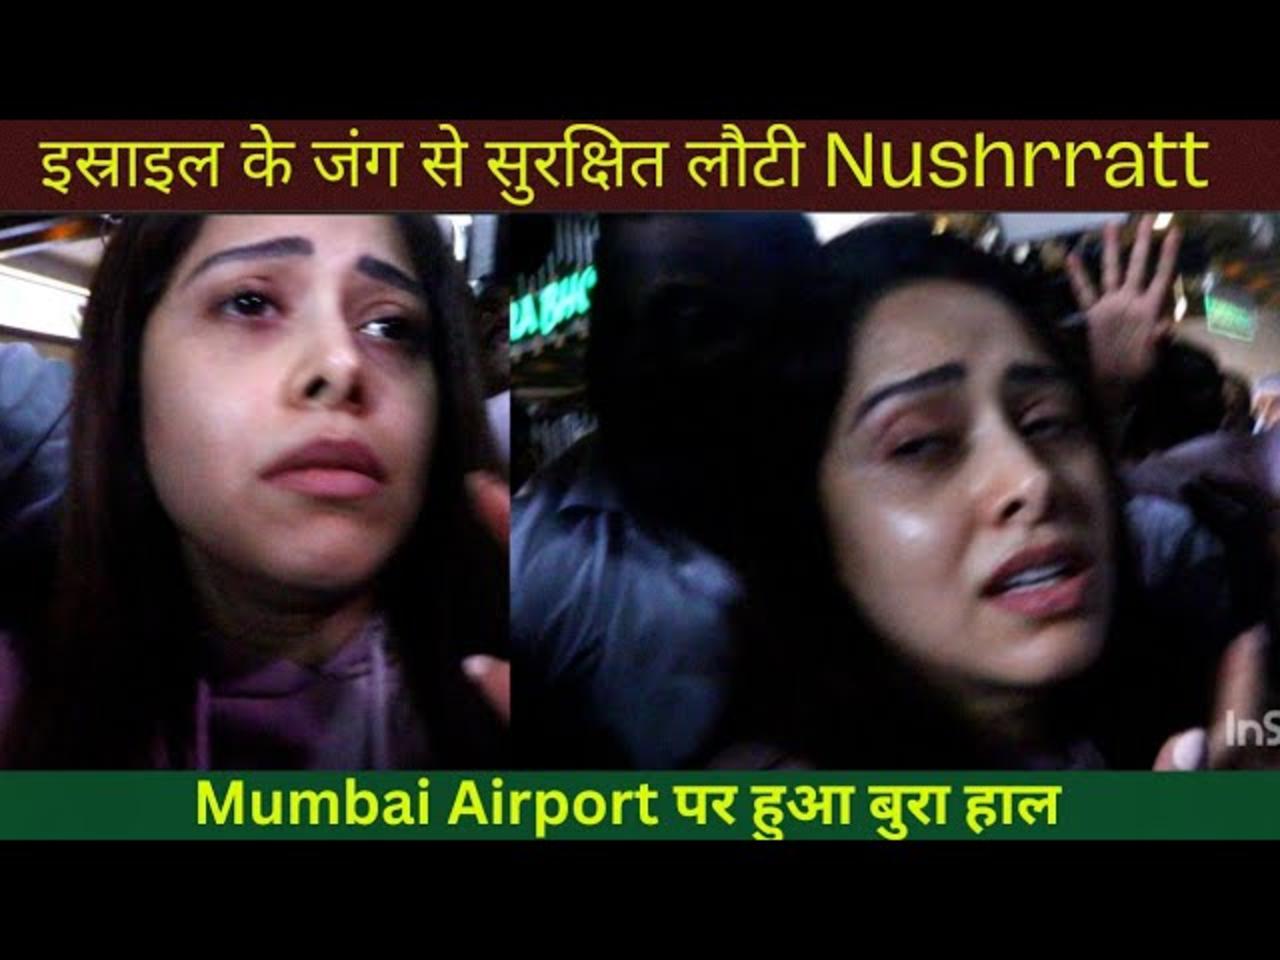 Nushrratt Bharuccha Reaches India safely from war-hit Israel,Badly Cries as She Gets Mobbed By Media